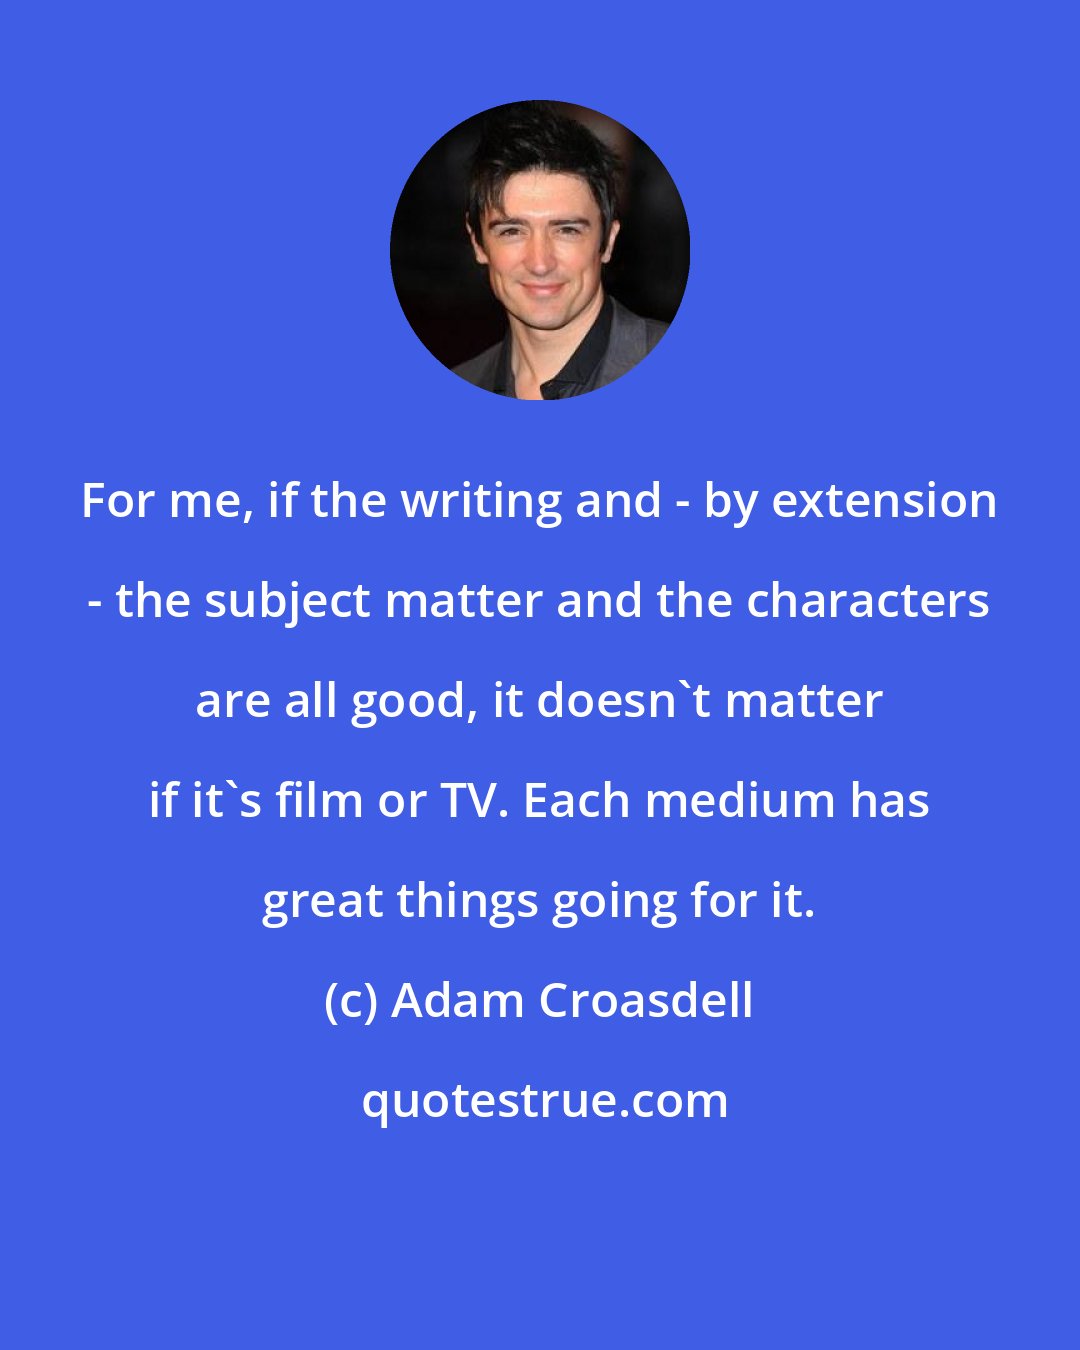 Adam Croasdell: For me, if the writing and - by extension - the subject matter and the characters are all good, it doesn't matter if it's film or TV. Each medium has great things going for it.